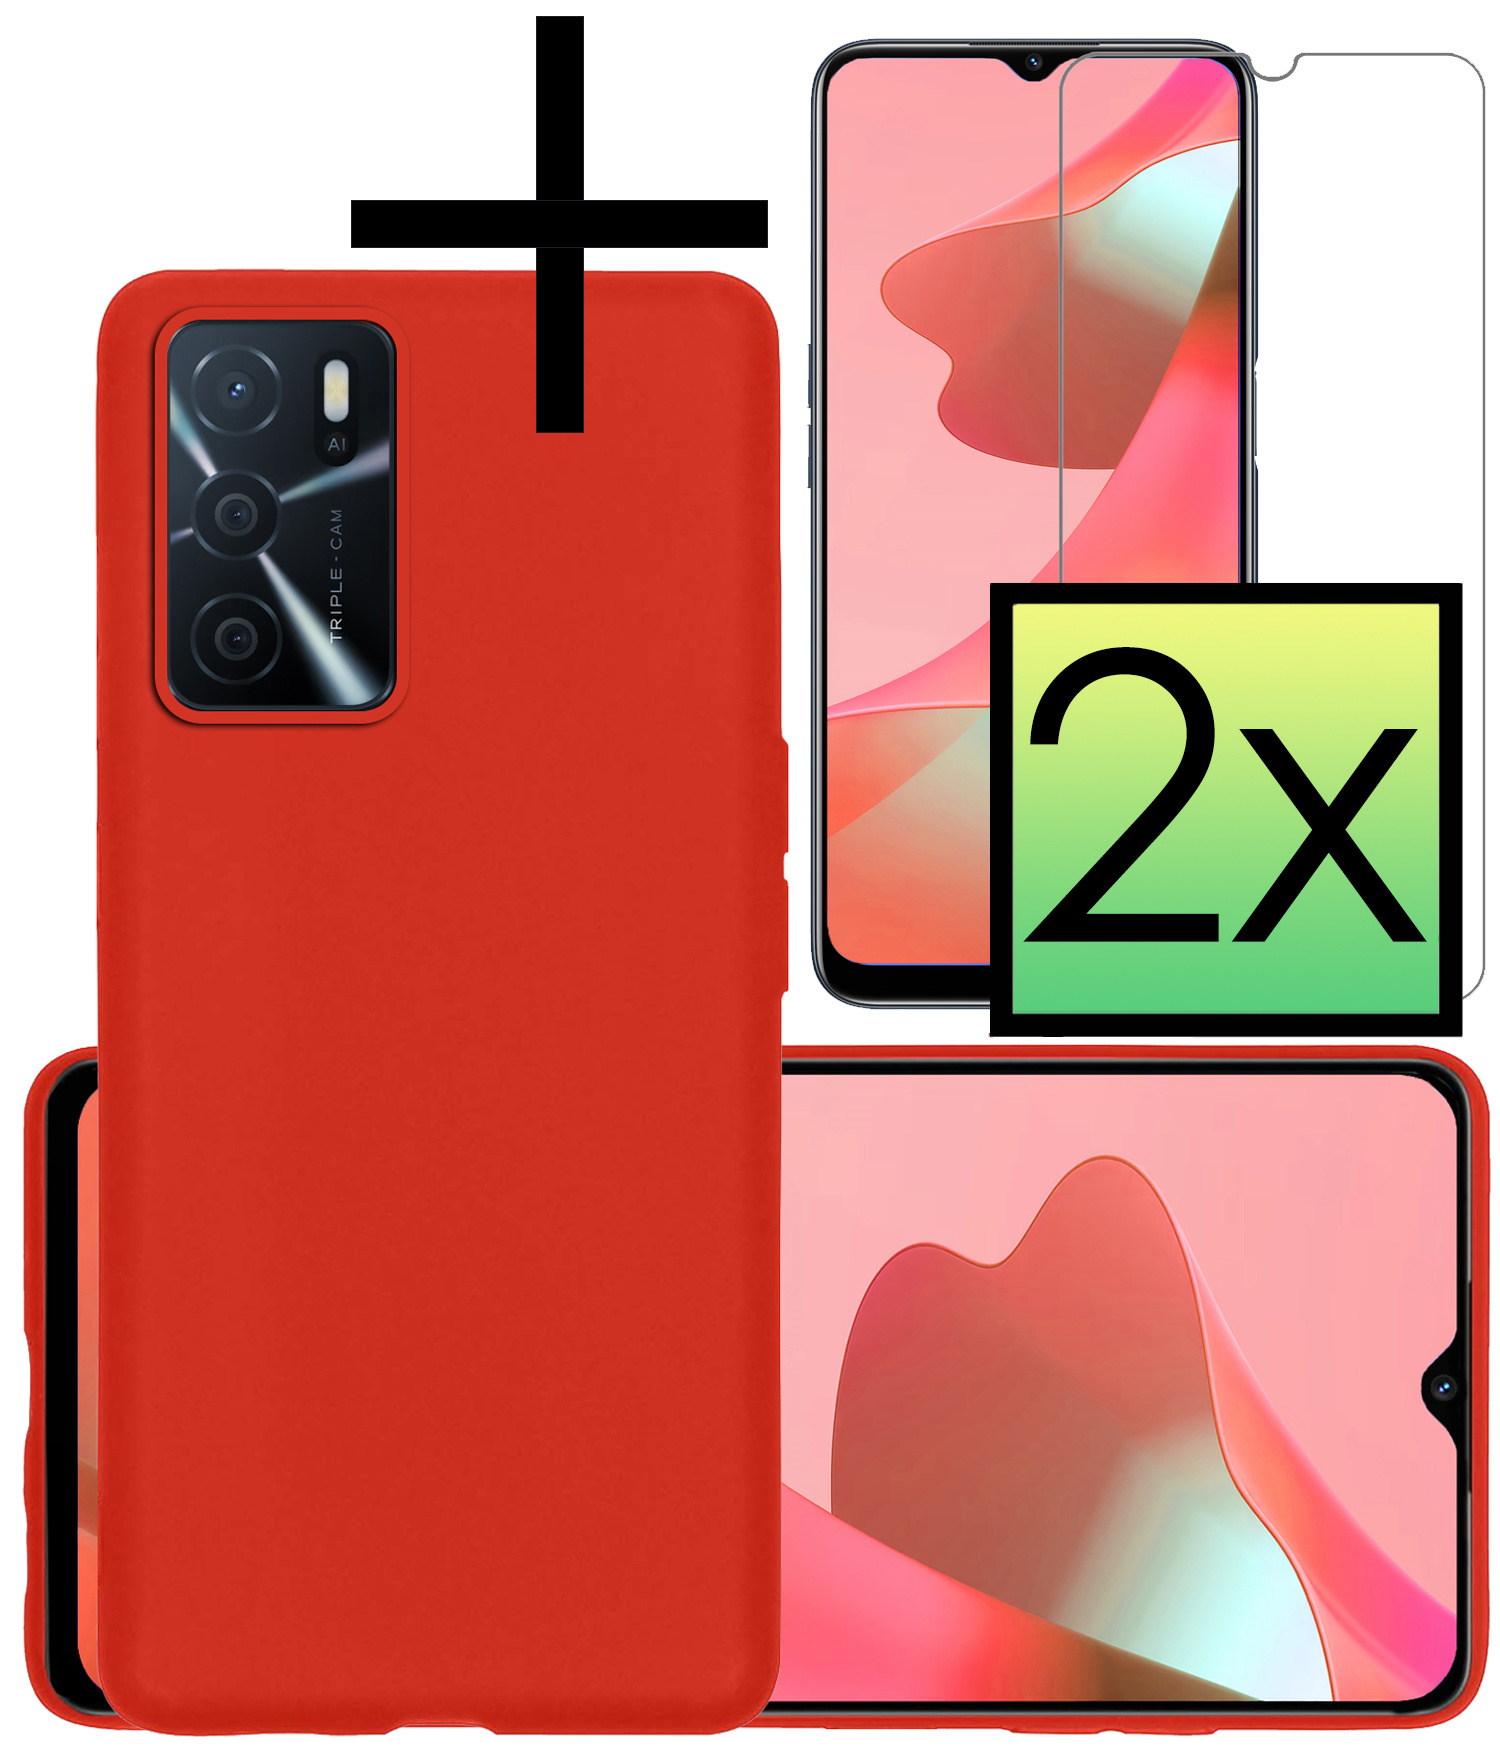 NoXx OPPO A16s Hoesje Back Cover Siliconen Case Hoes Met 2x Screenprotector - Rood